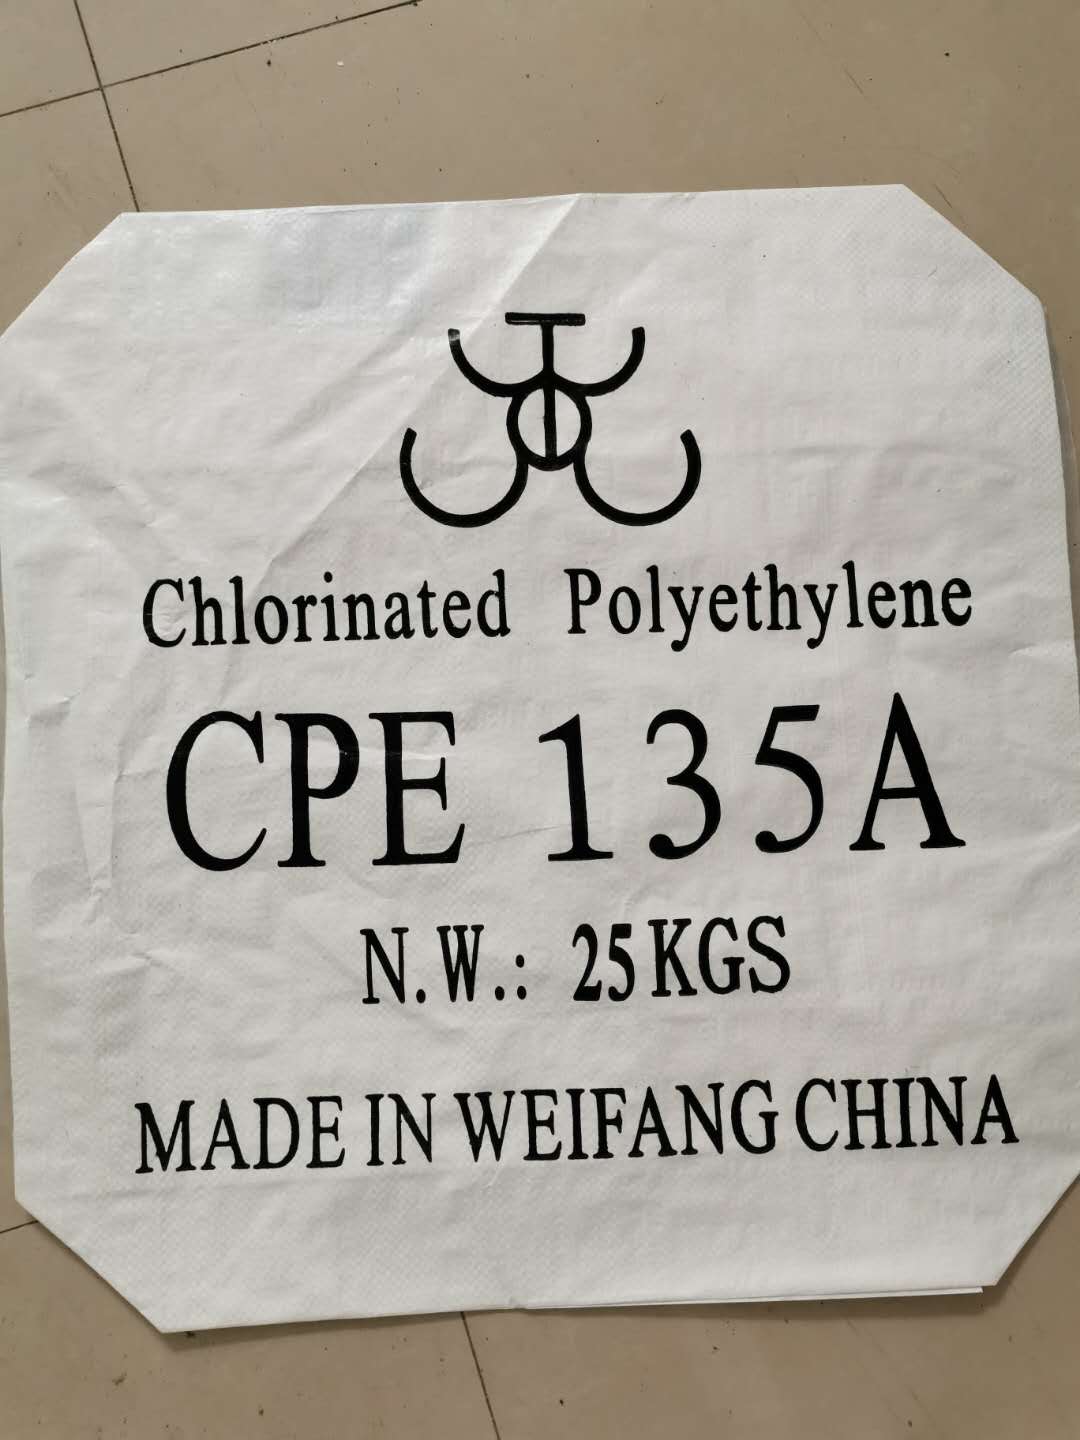 Let me know : what is CPE/ chlorinated polyethylene?